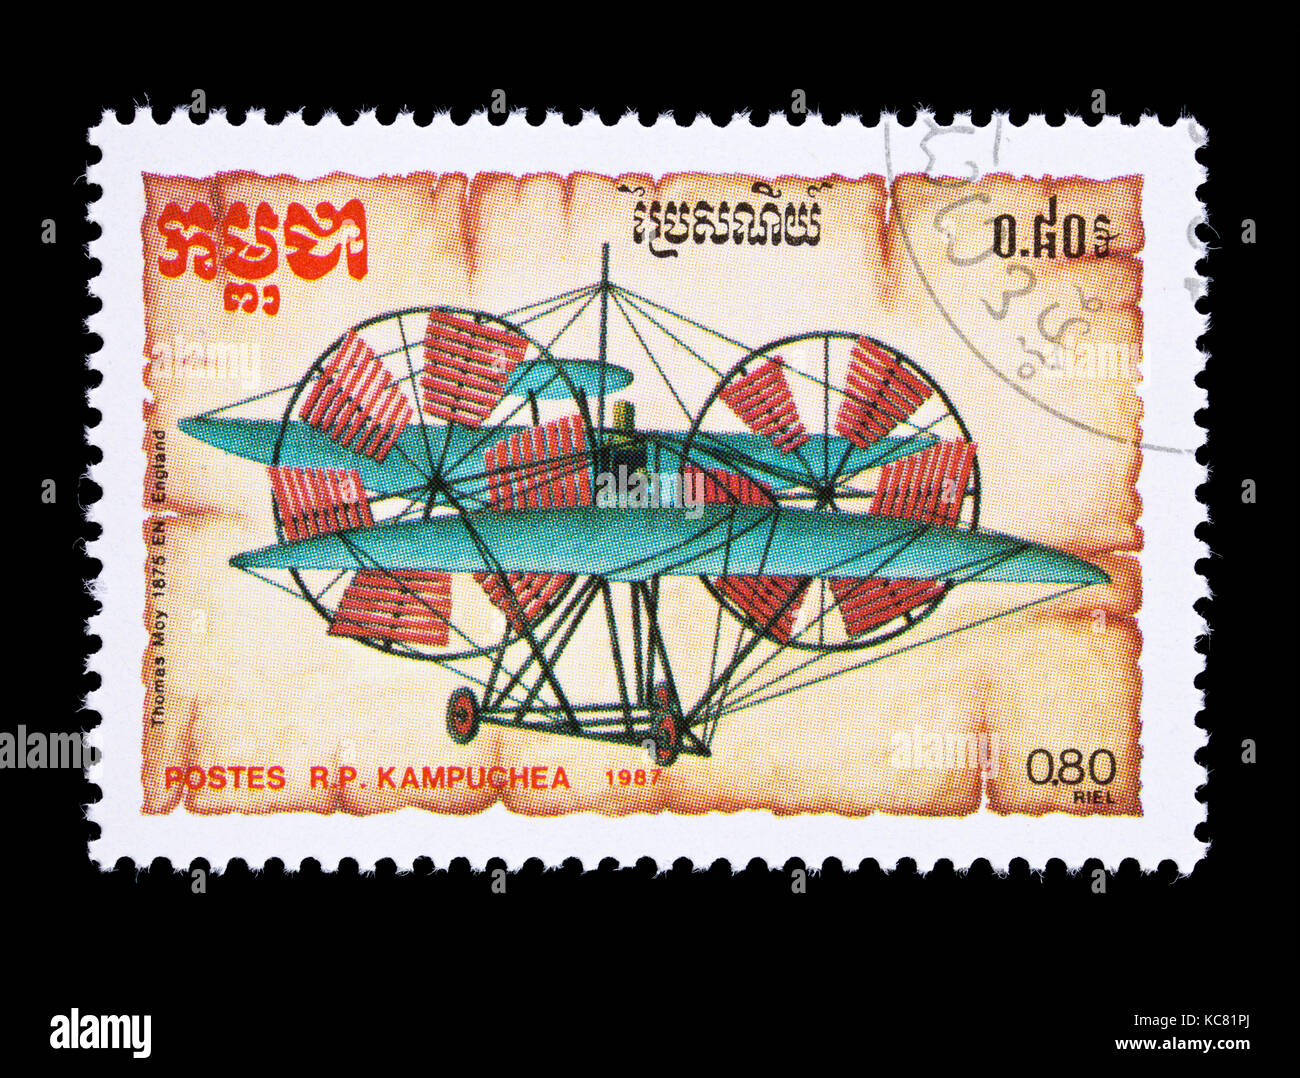 Postage stamp from Cambodia (Kampuchea)depicting an early airplane design by Thomas Moy, 1875 Stock Photo